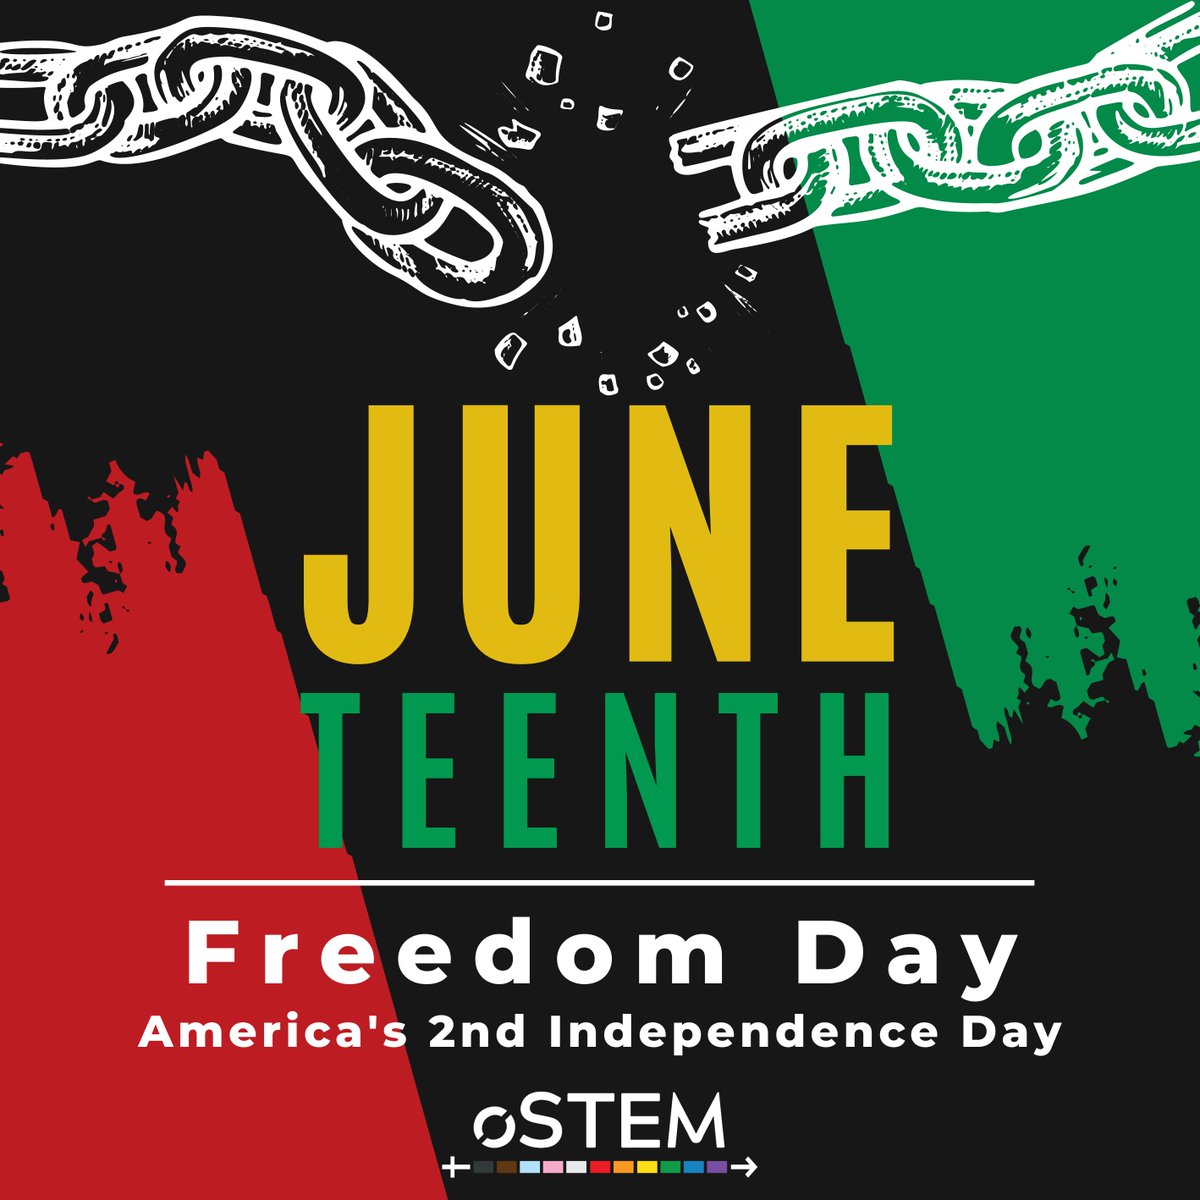 Happy #Juneteenth! Today we celebrate freedom and remember the importance of fighting for justice and equality for all. Let's honor the legacy of those who came before us and work towards a better future.